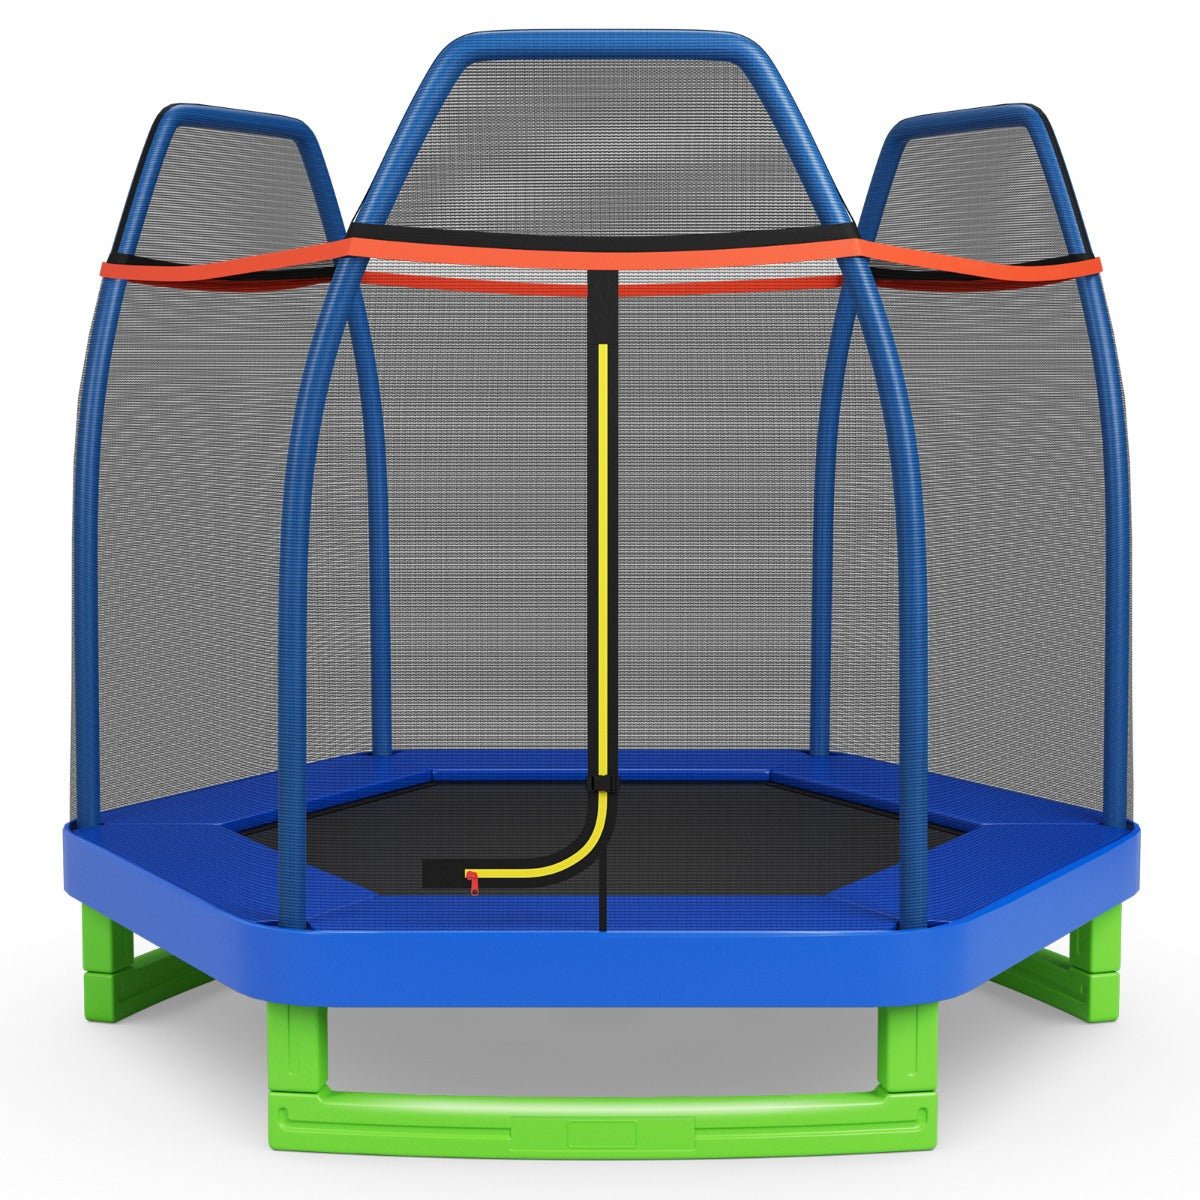 Outdoor Fun: Kids Trampoline with Safety Enclosure Net for Outdoor Play Blue